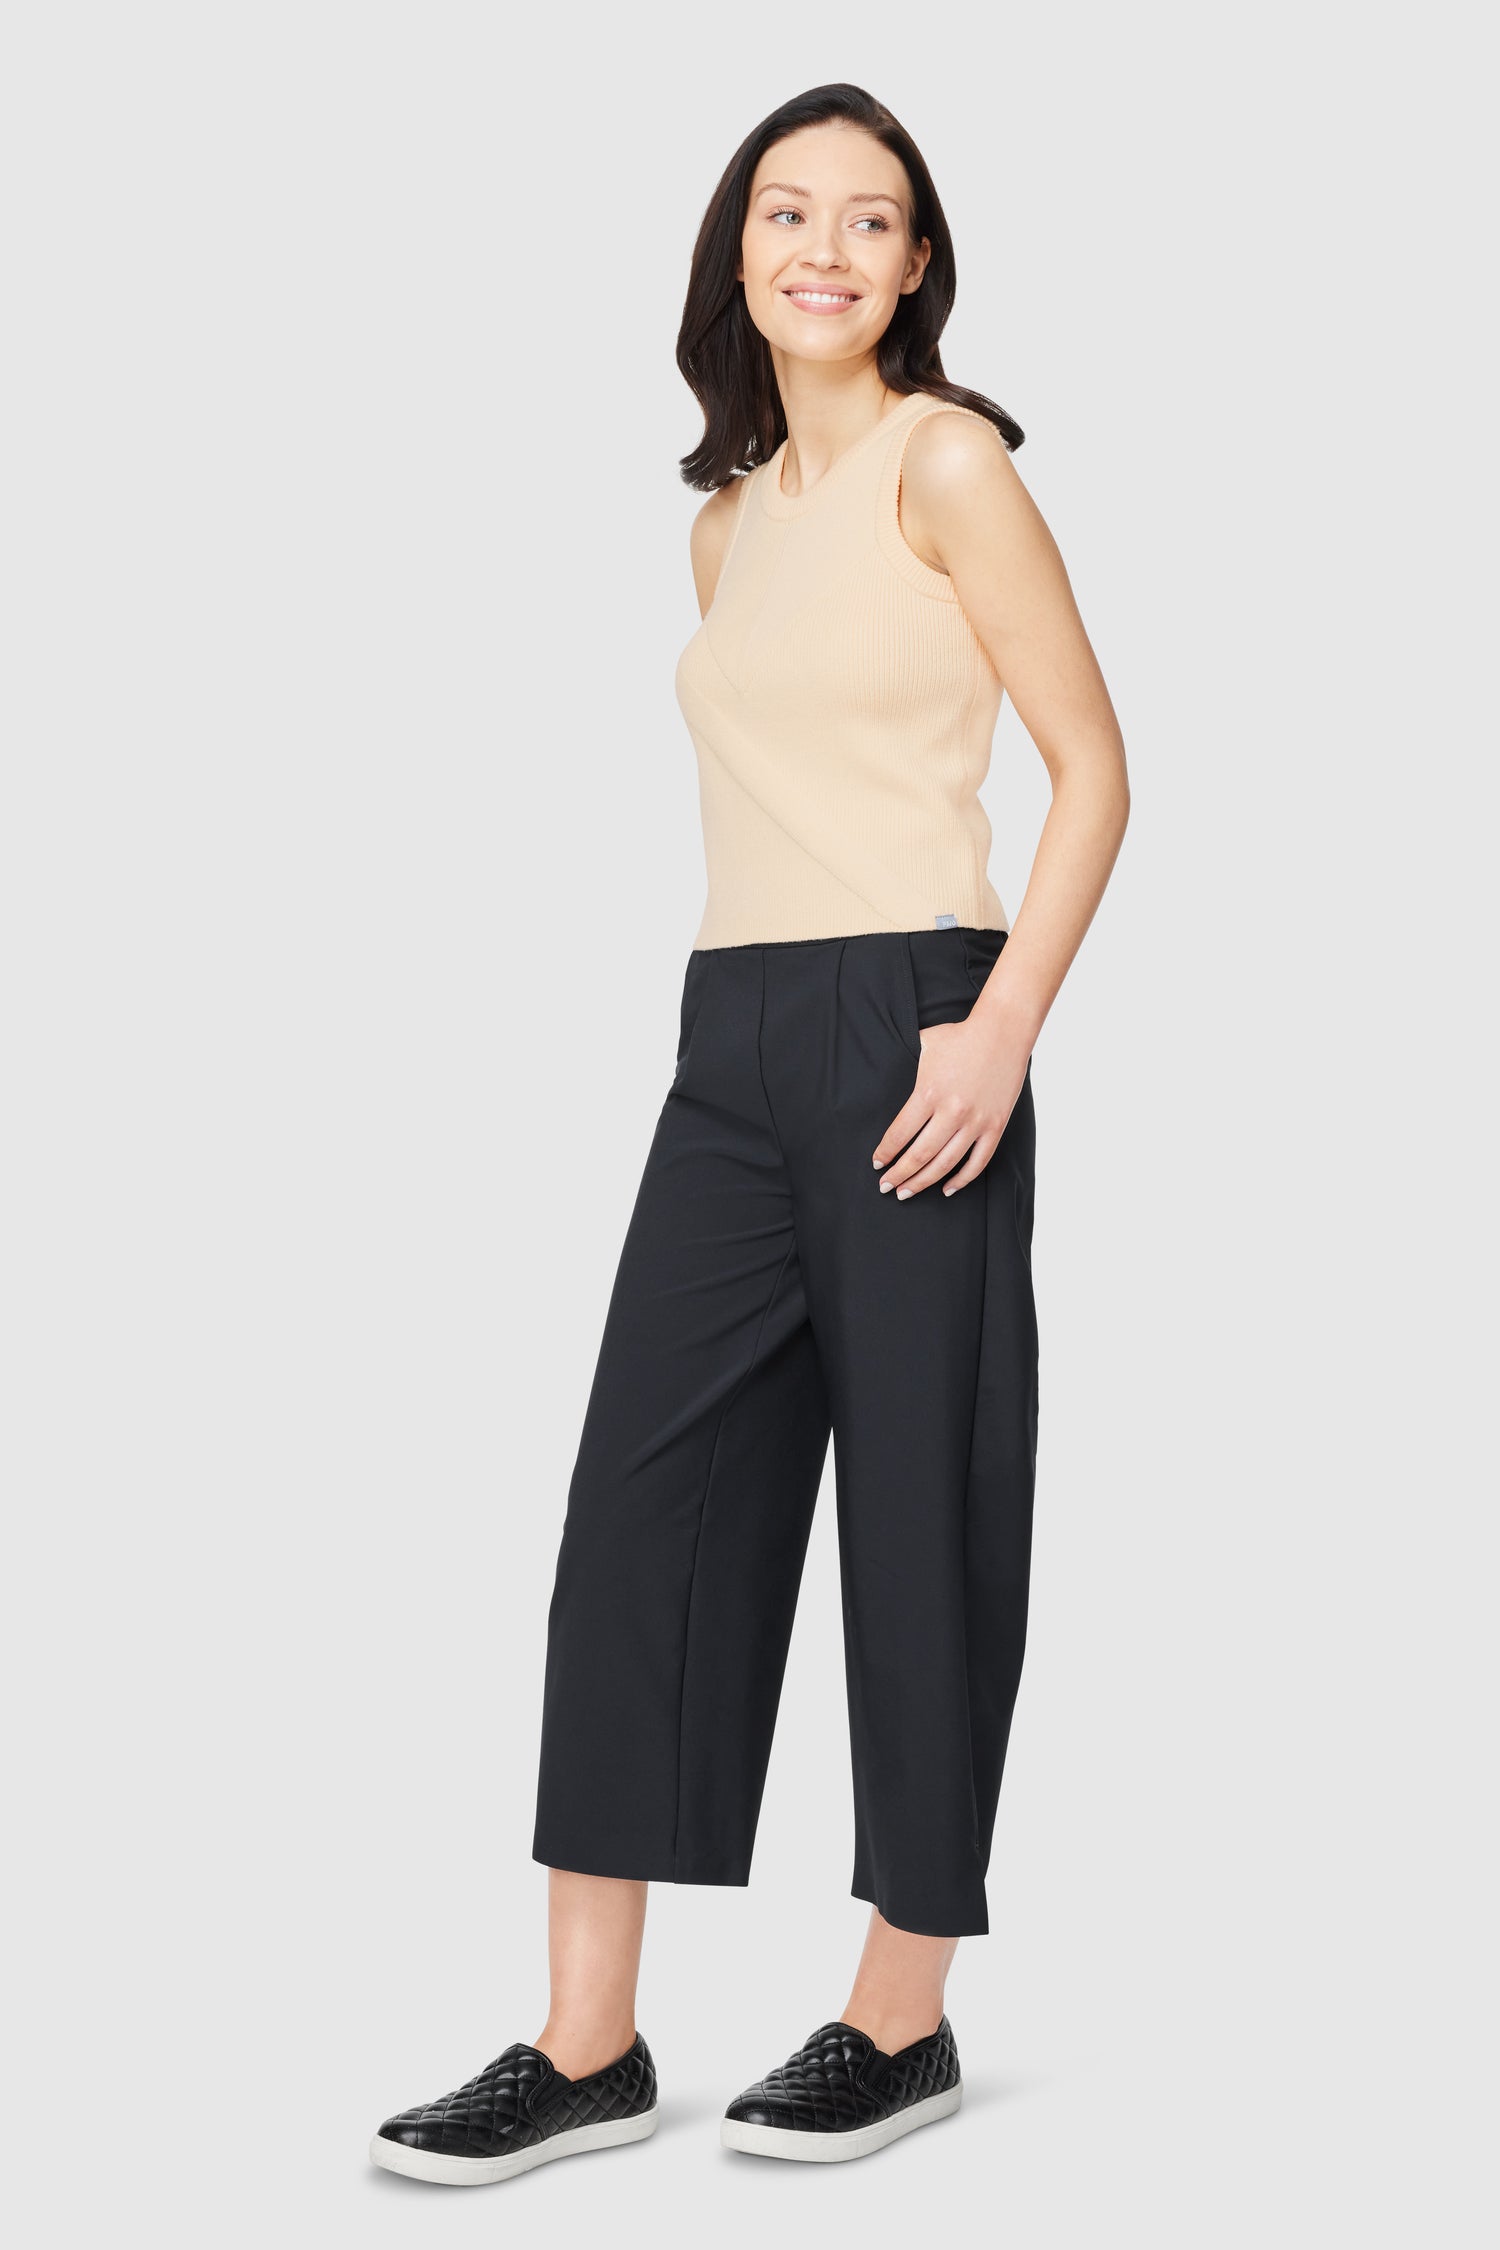 Free FWD Women's Cropped Wide Leg Pant - BEST SELLING